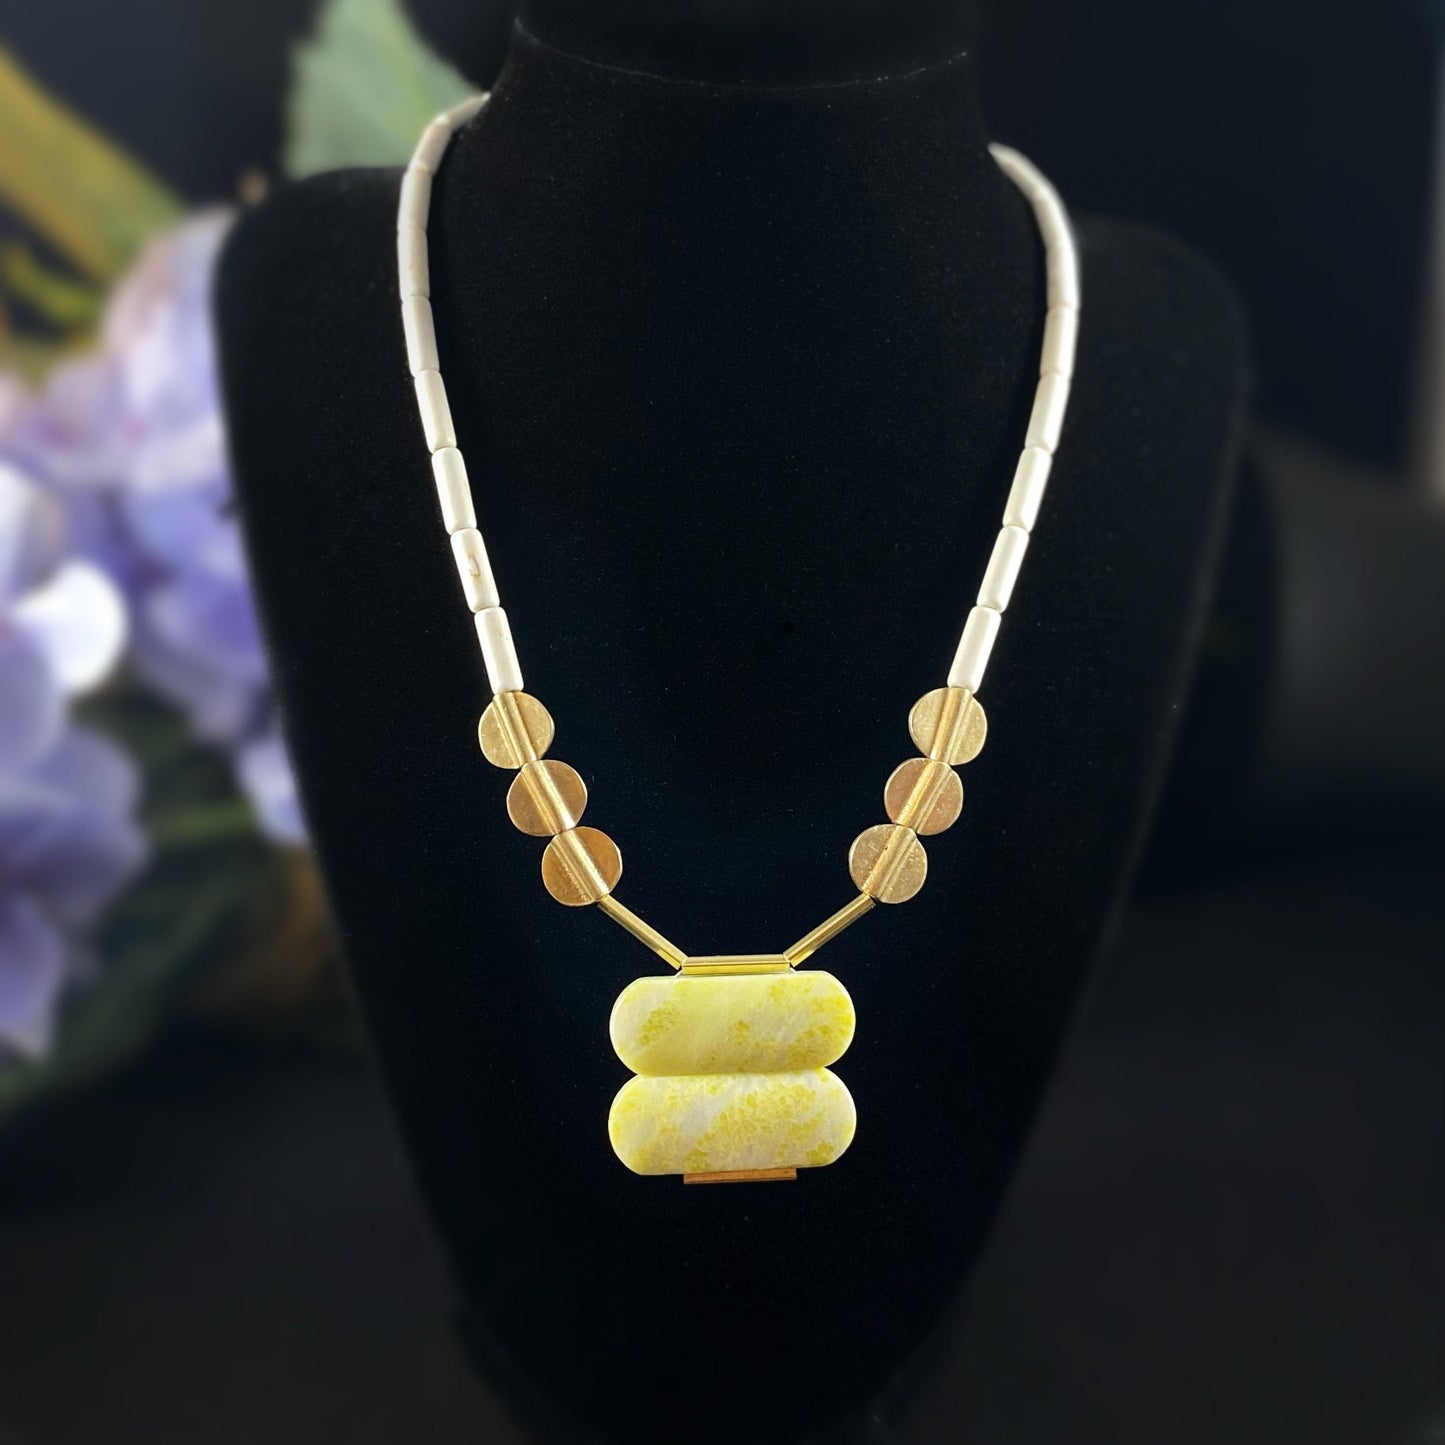 Green and Gold Geometric Art Deco Style Necklace - 18kt Gold Over Brass with Magnesite and Serpentine - David Aubrey Jewelry